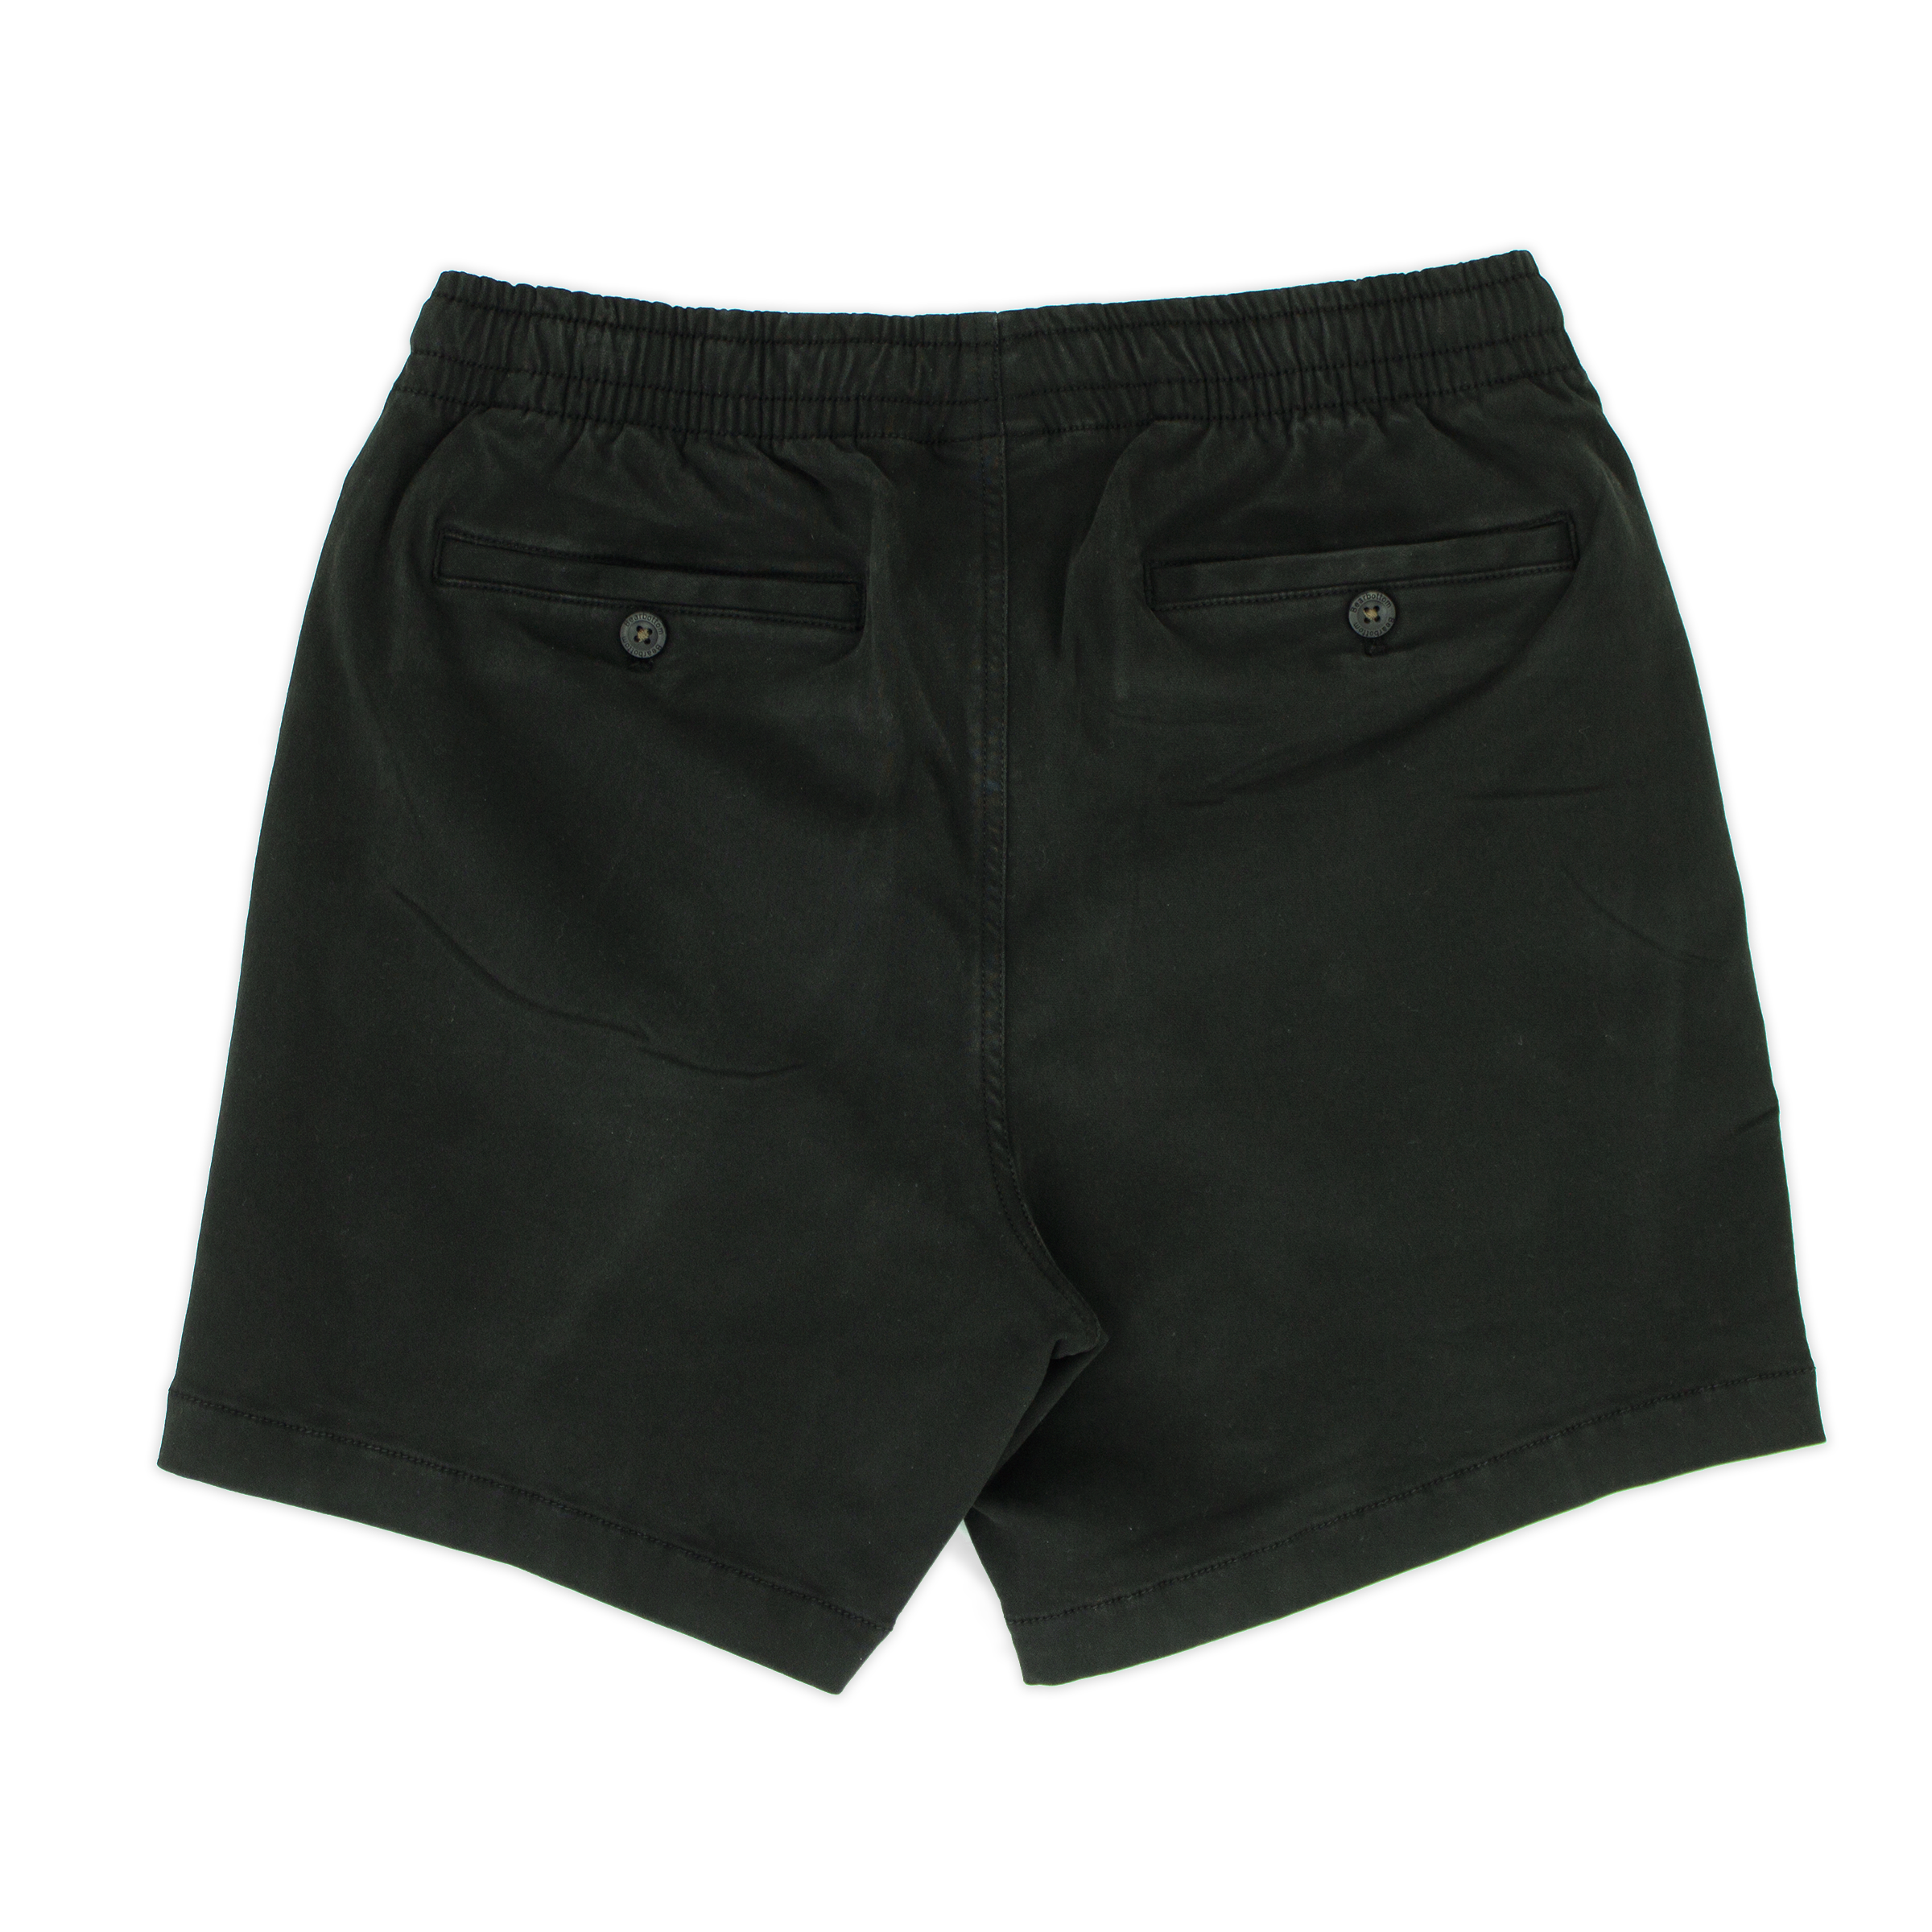 Alto Short 5.5" inseam in Black back with elastic waistband and two welt pocket with horn buttons